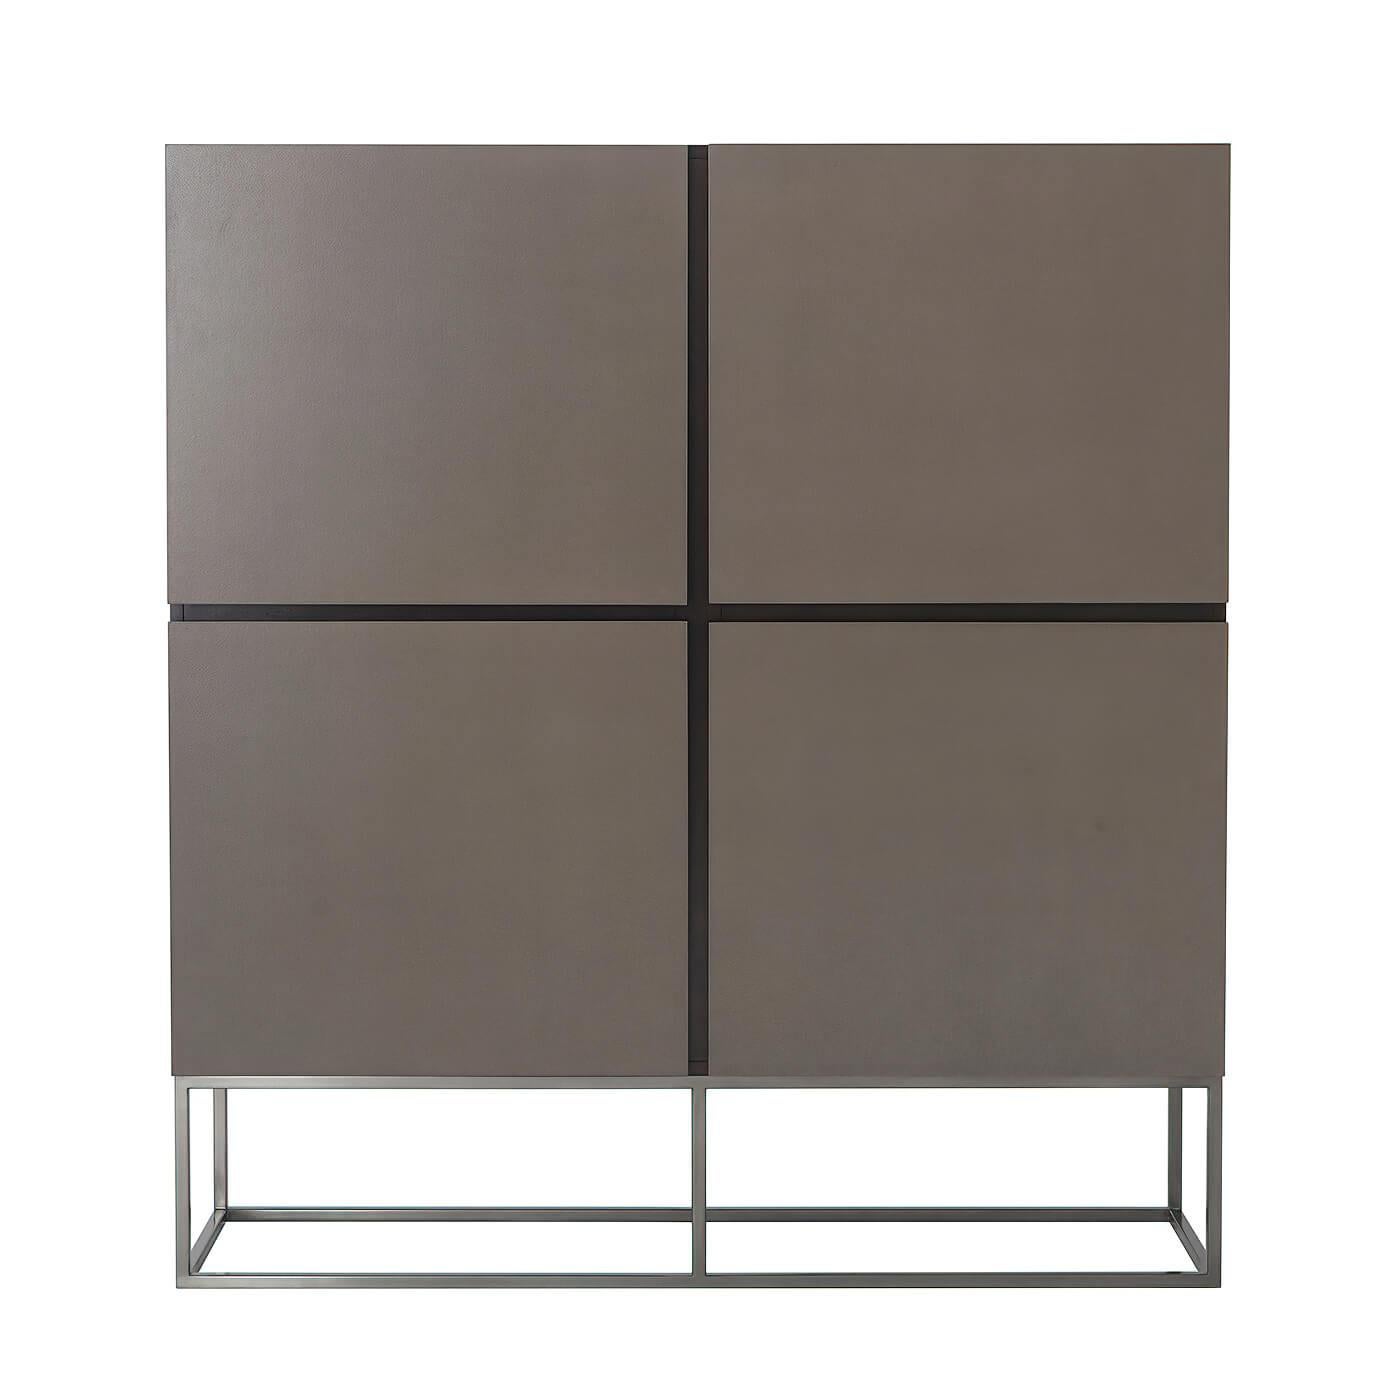 A modern leather paneled four-door cabinet, with an ossian finish cherry case, eclipse leather-wrapped panel doors with four sections having adjustable shelves, and raised on a boxed gunmetal finish steel base.

Dimensions: 57